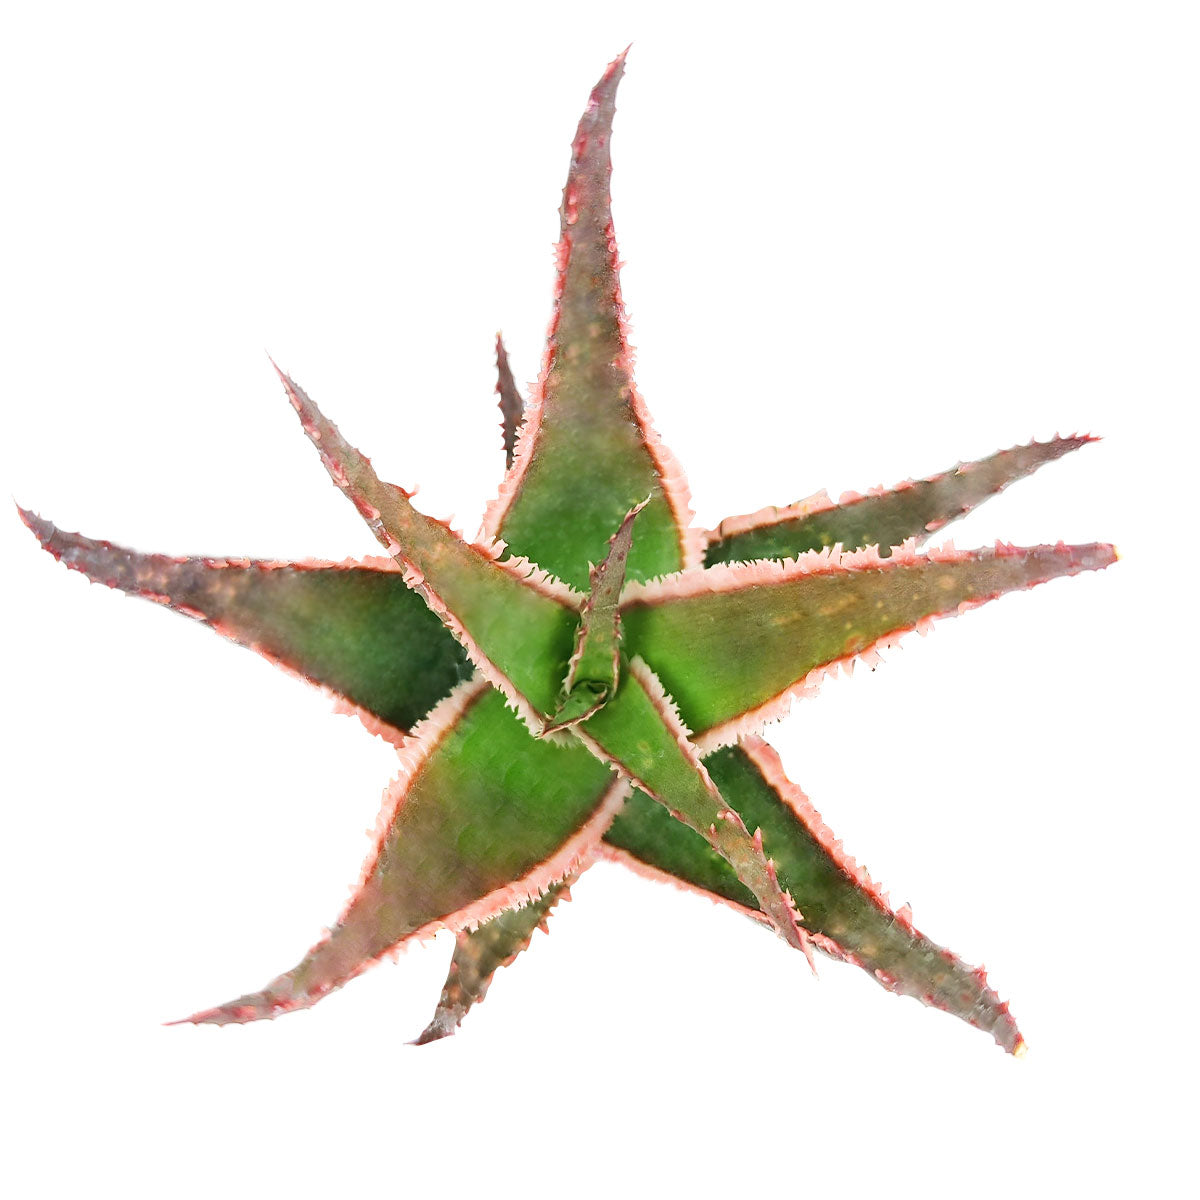 Aloe Coral Fire Succulent, succulents store in CA, cactus, Succulents shop near me, succulents garden, succulent subscription, how to grow succulents, succulent care, Succulents, Aloe Coral Fire Succulent in California, How to grow Aloe Coral Fire Succulent